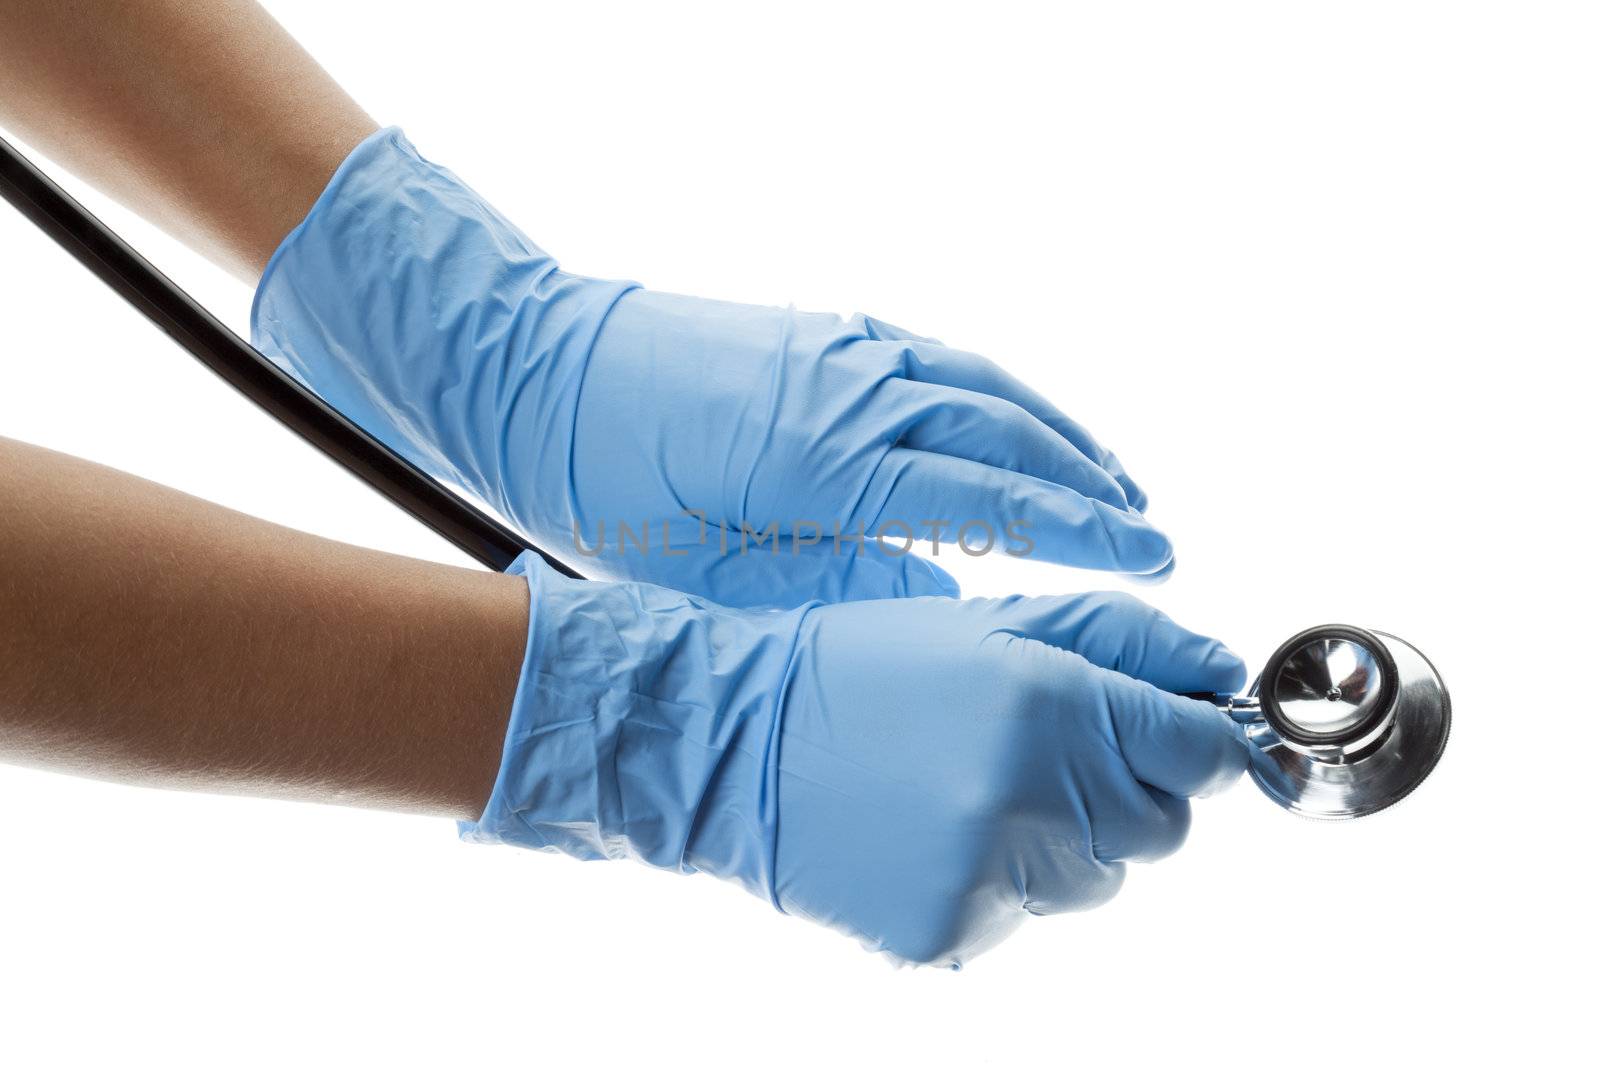 cropped image of a doctor wearing surgical glove and holding ste by kozzi